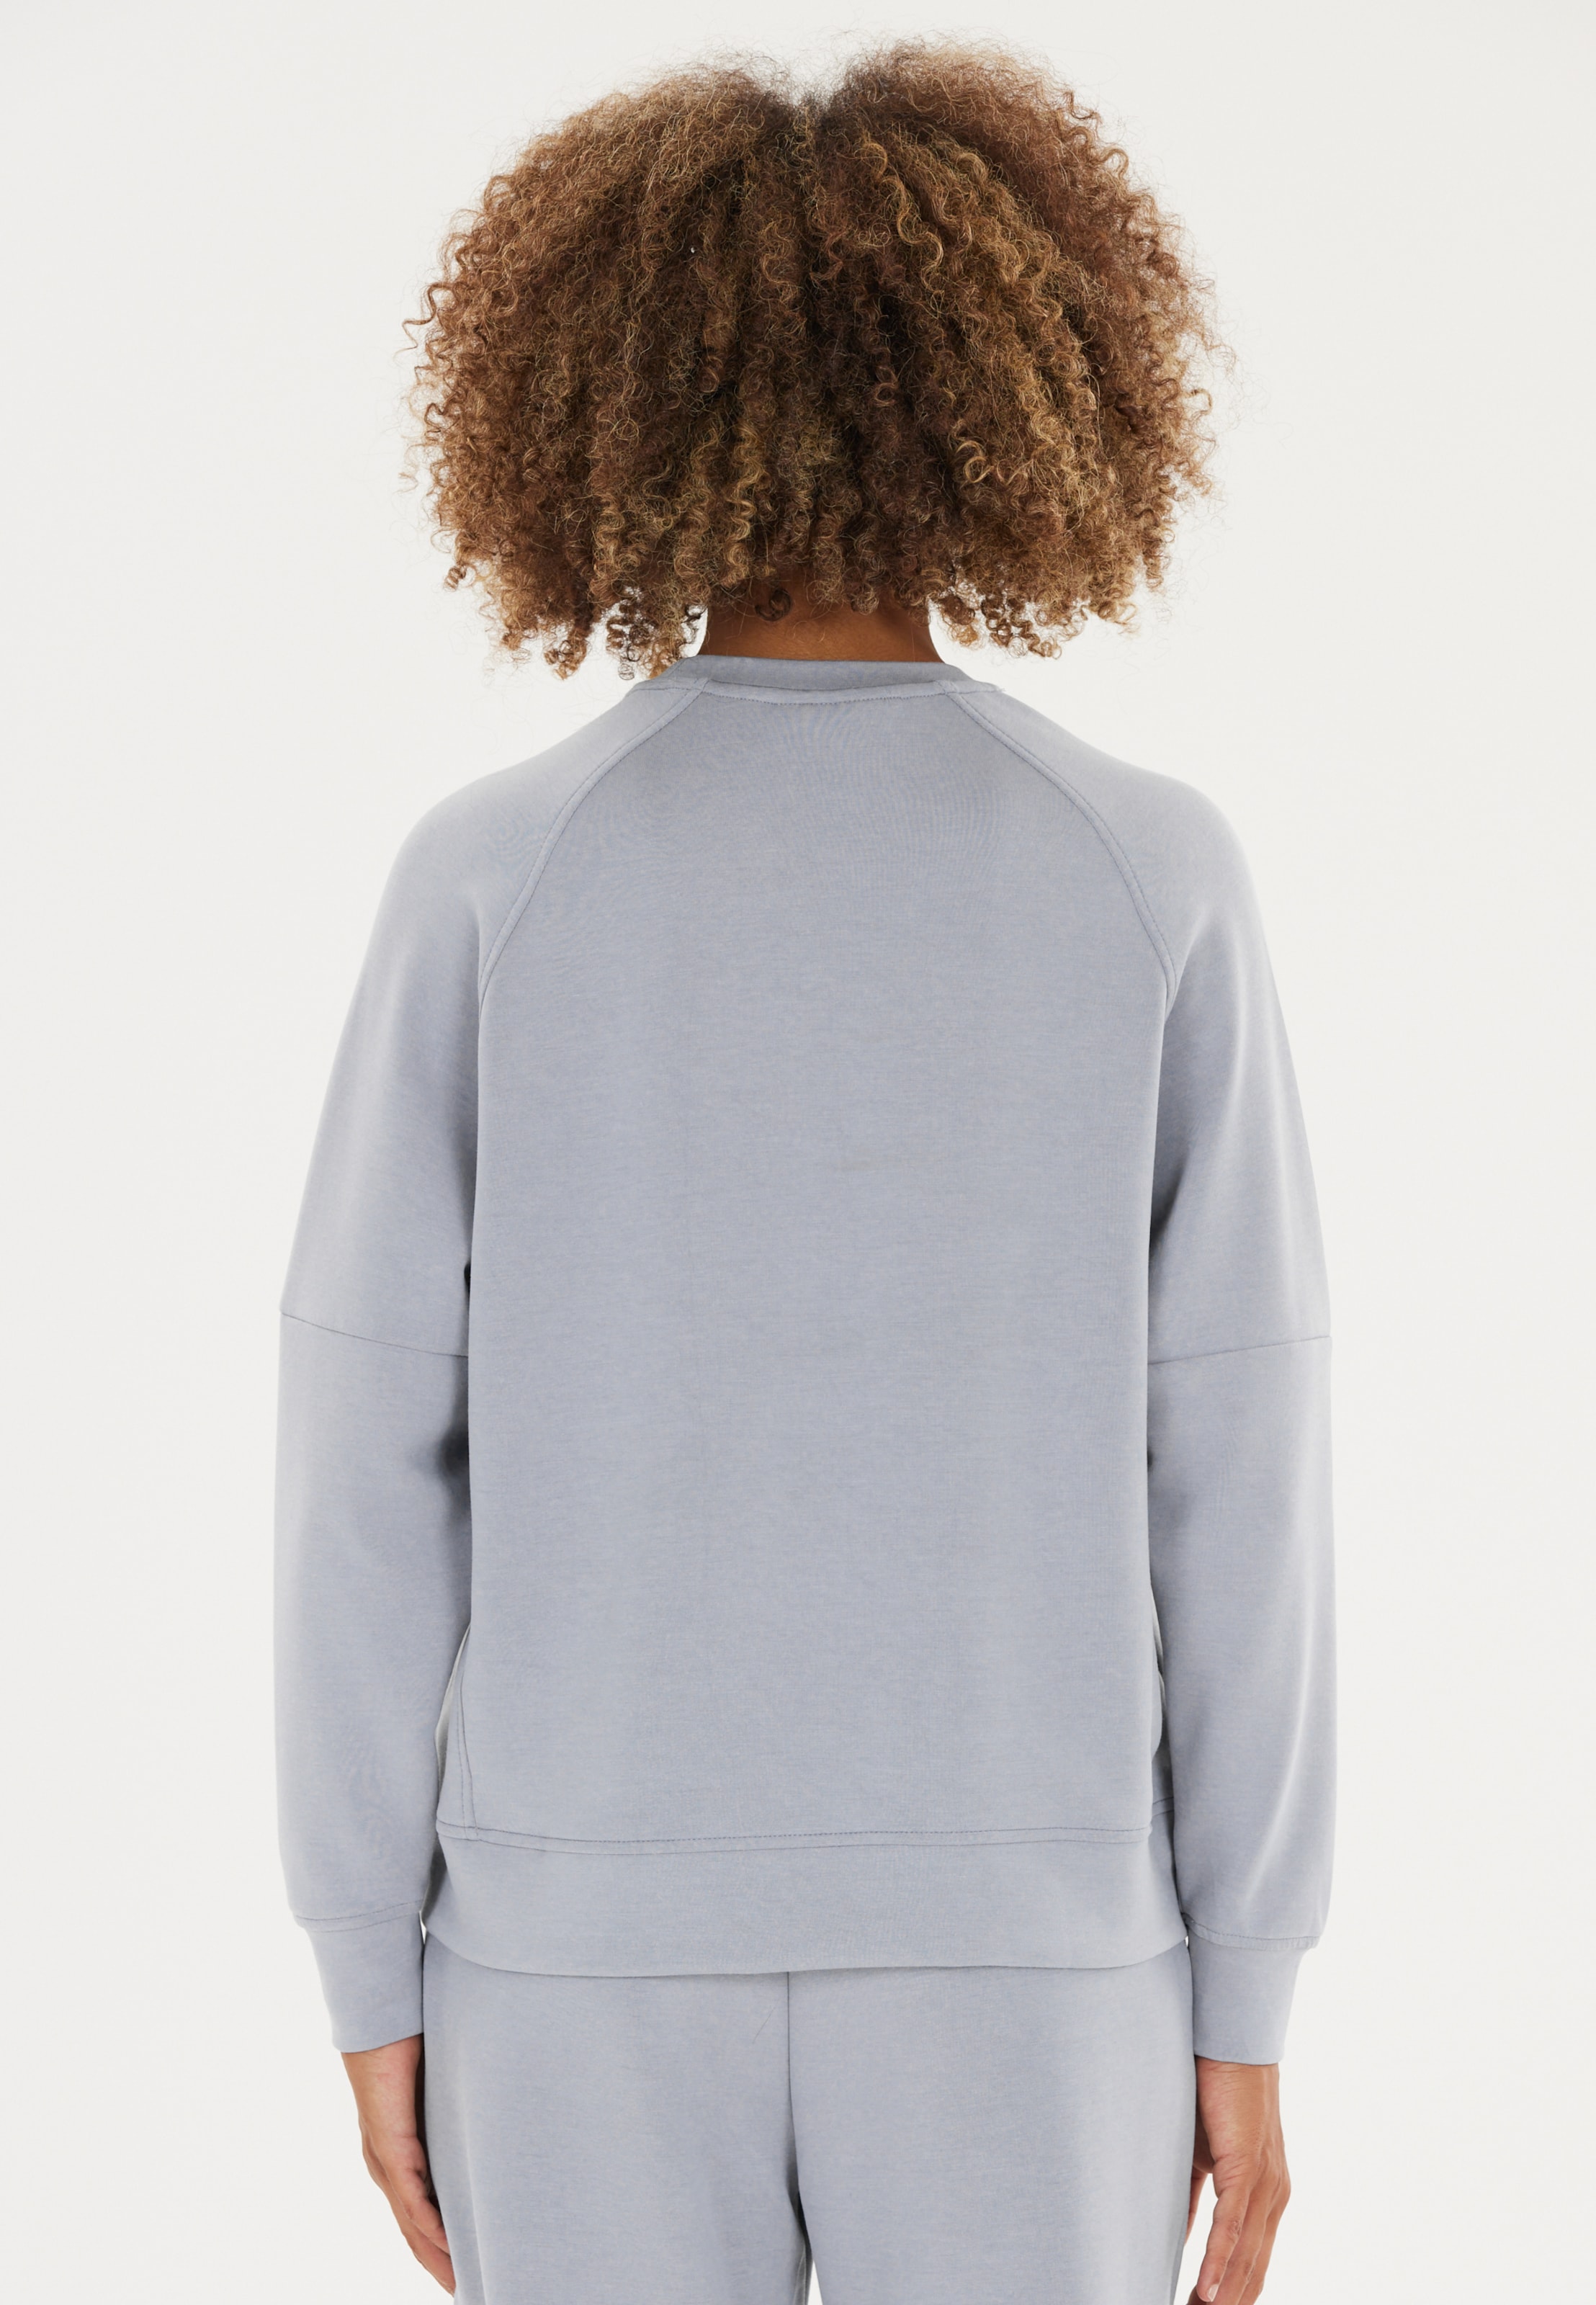 Athlecia Athletic Sweatshirt 'Jacey' in Blue | ABOUT YOU